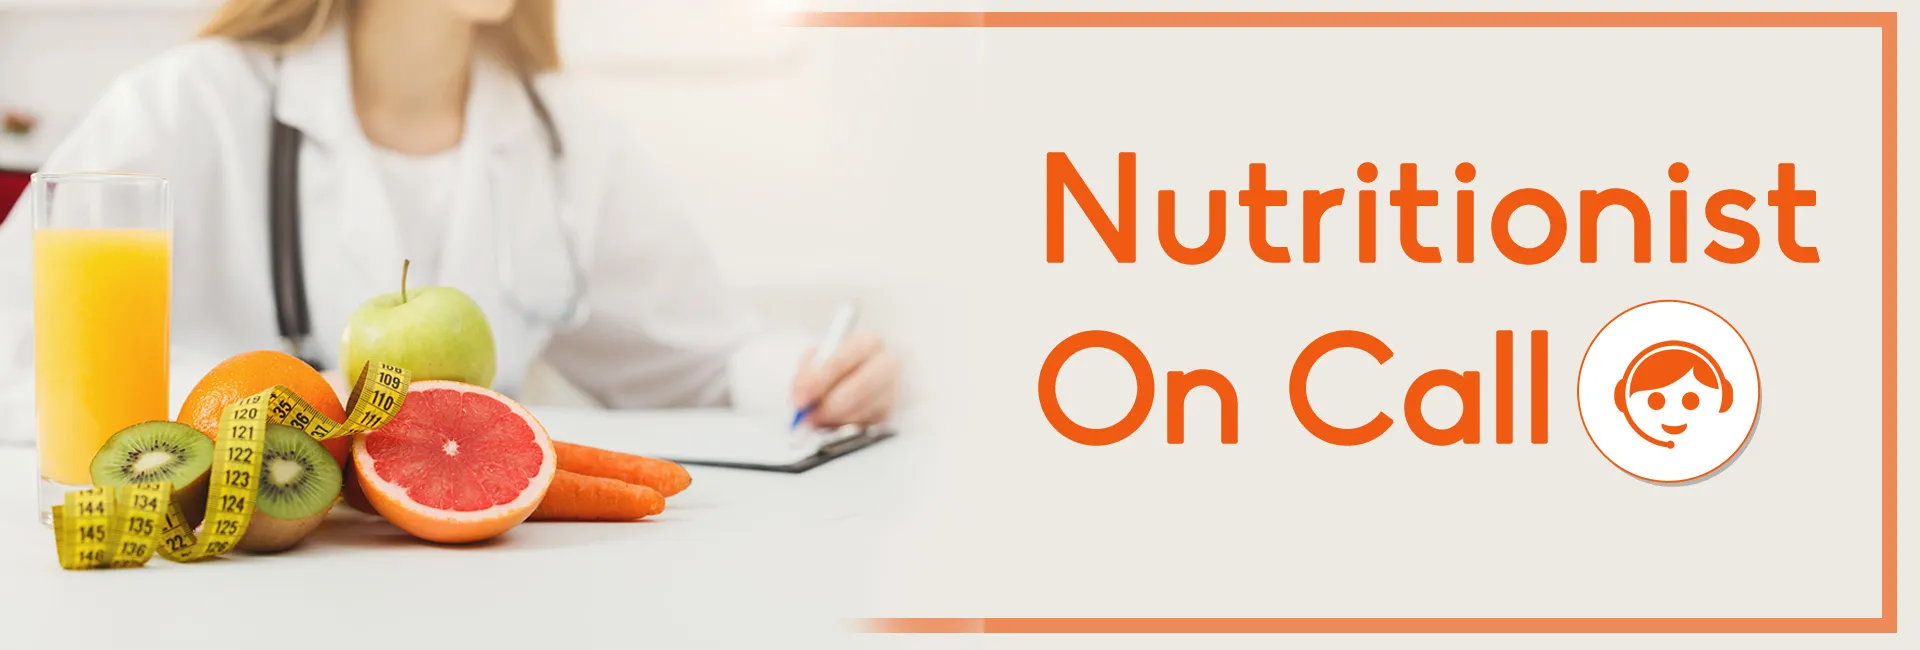 Nutritionist On Call In Al Lisaili